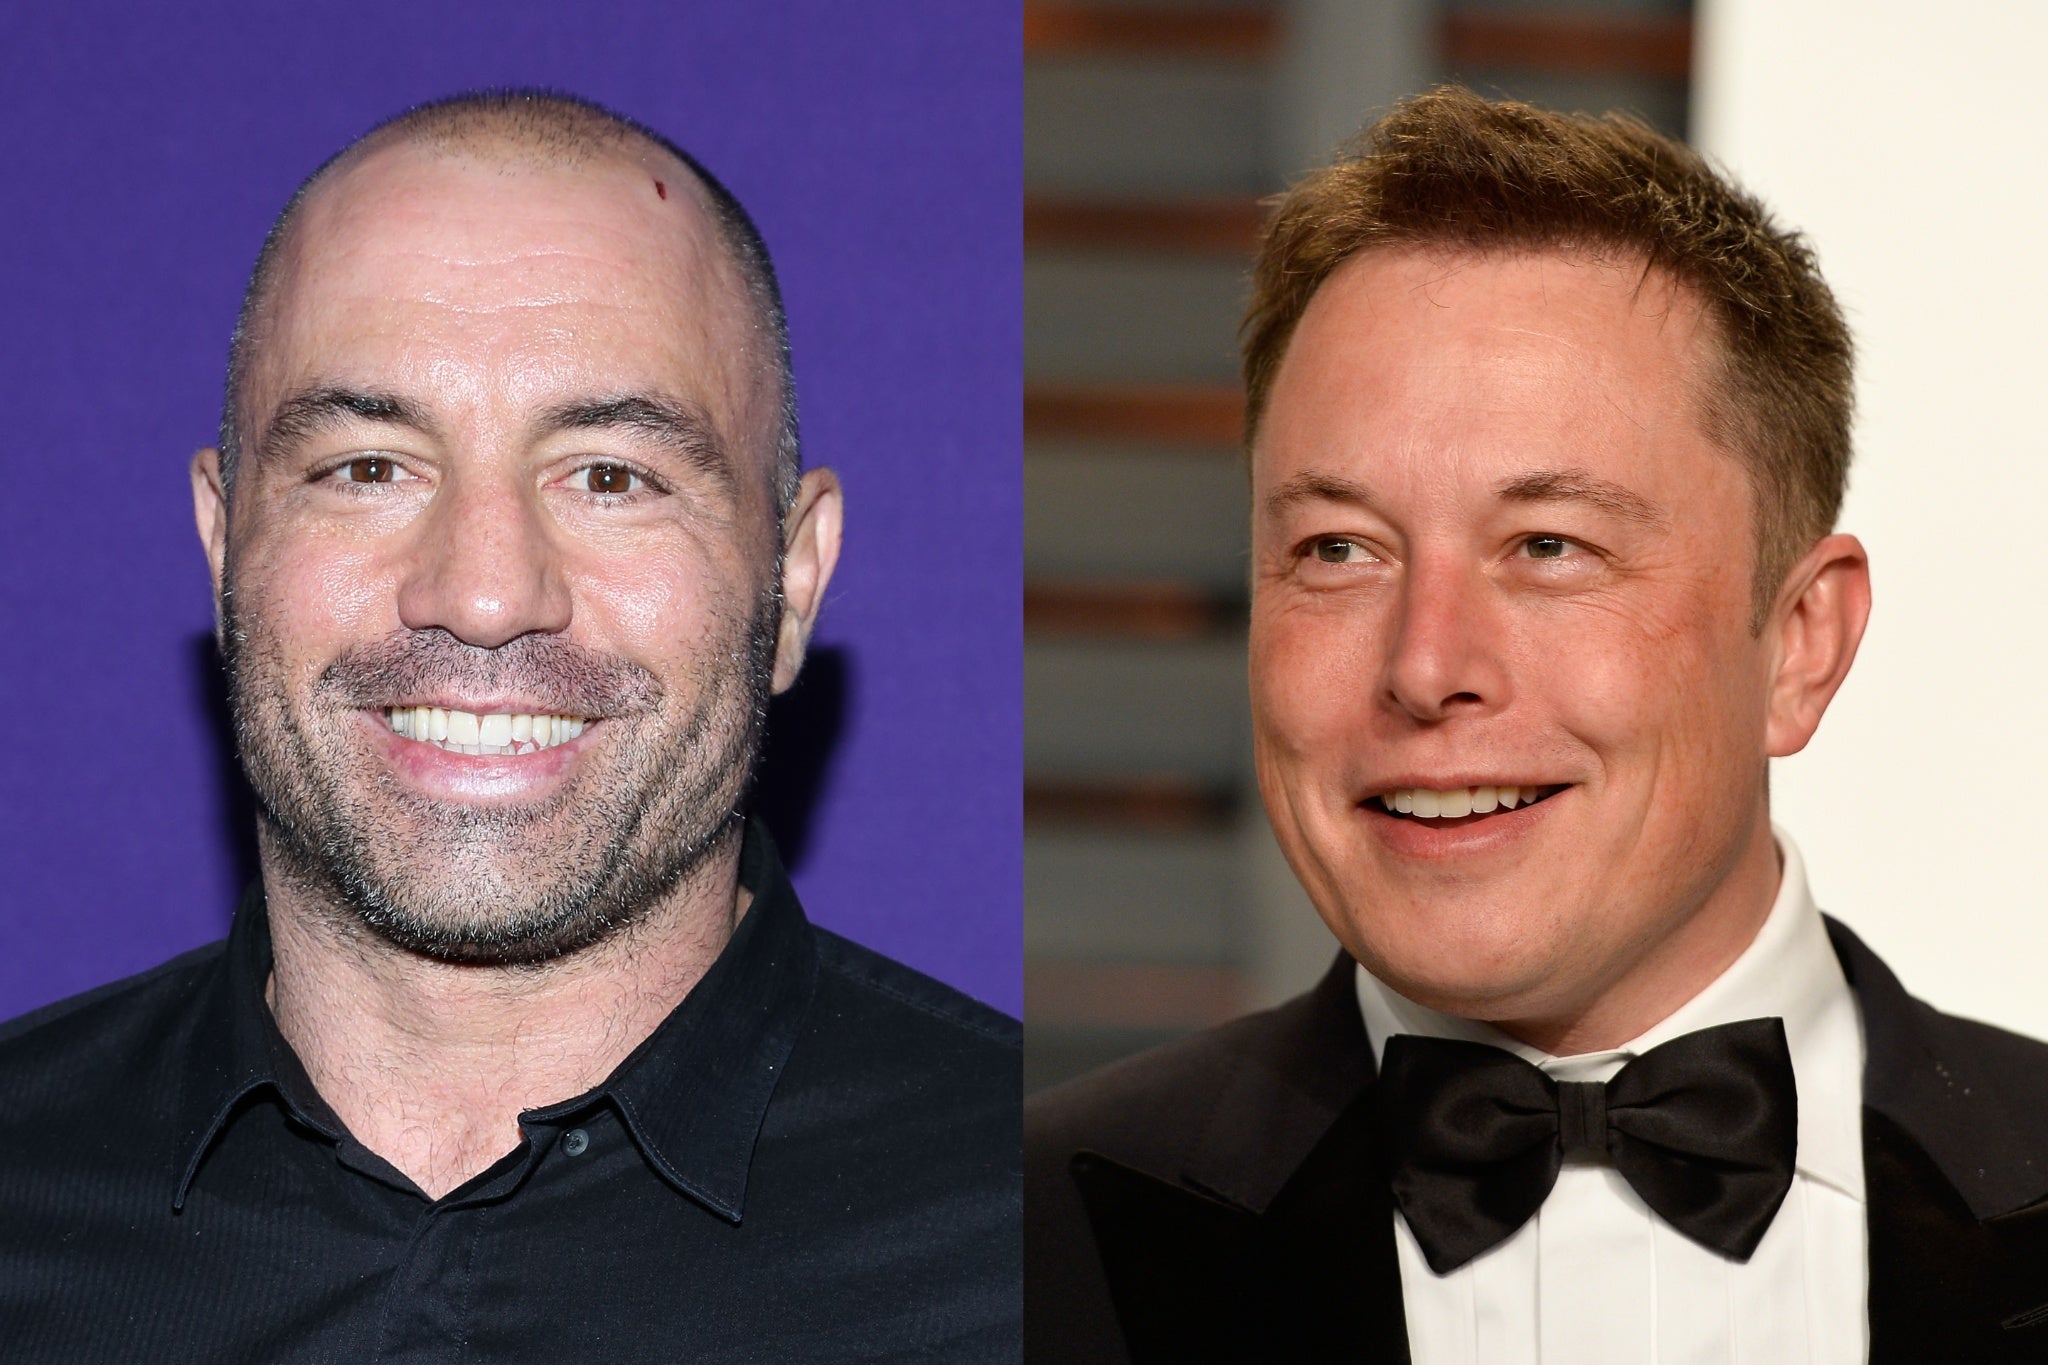 Elon Musk (right) has frequently appeared on ‘The Joe Rogan Experience’